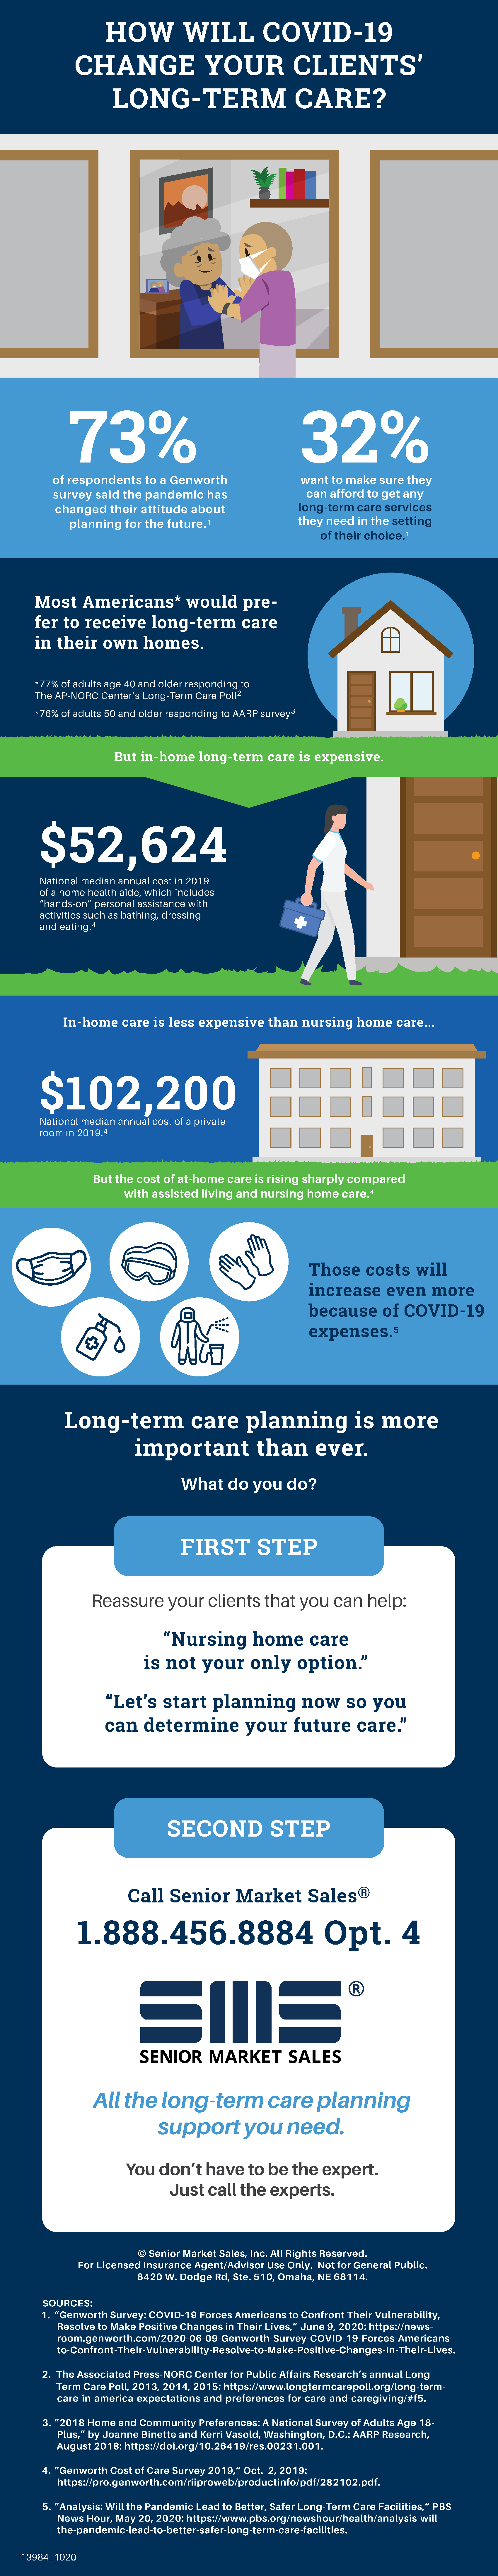 how will covid change long term care